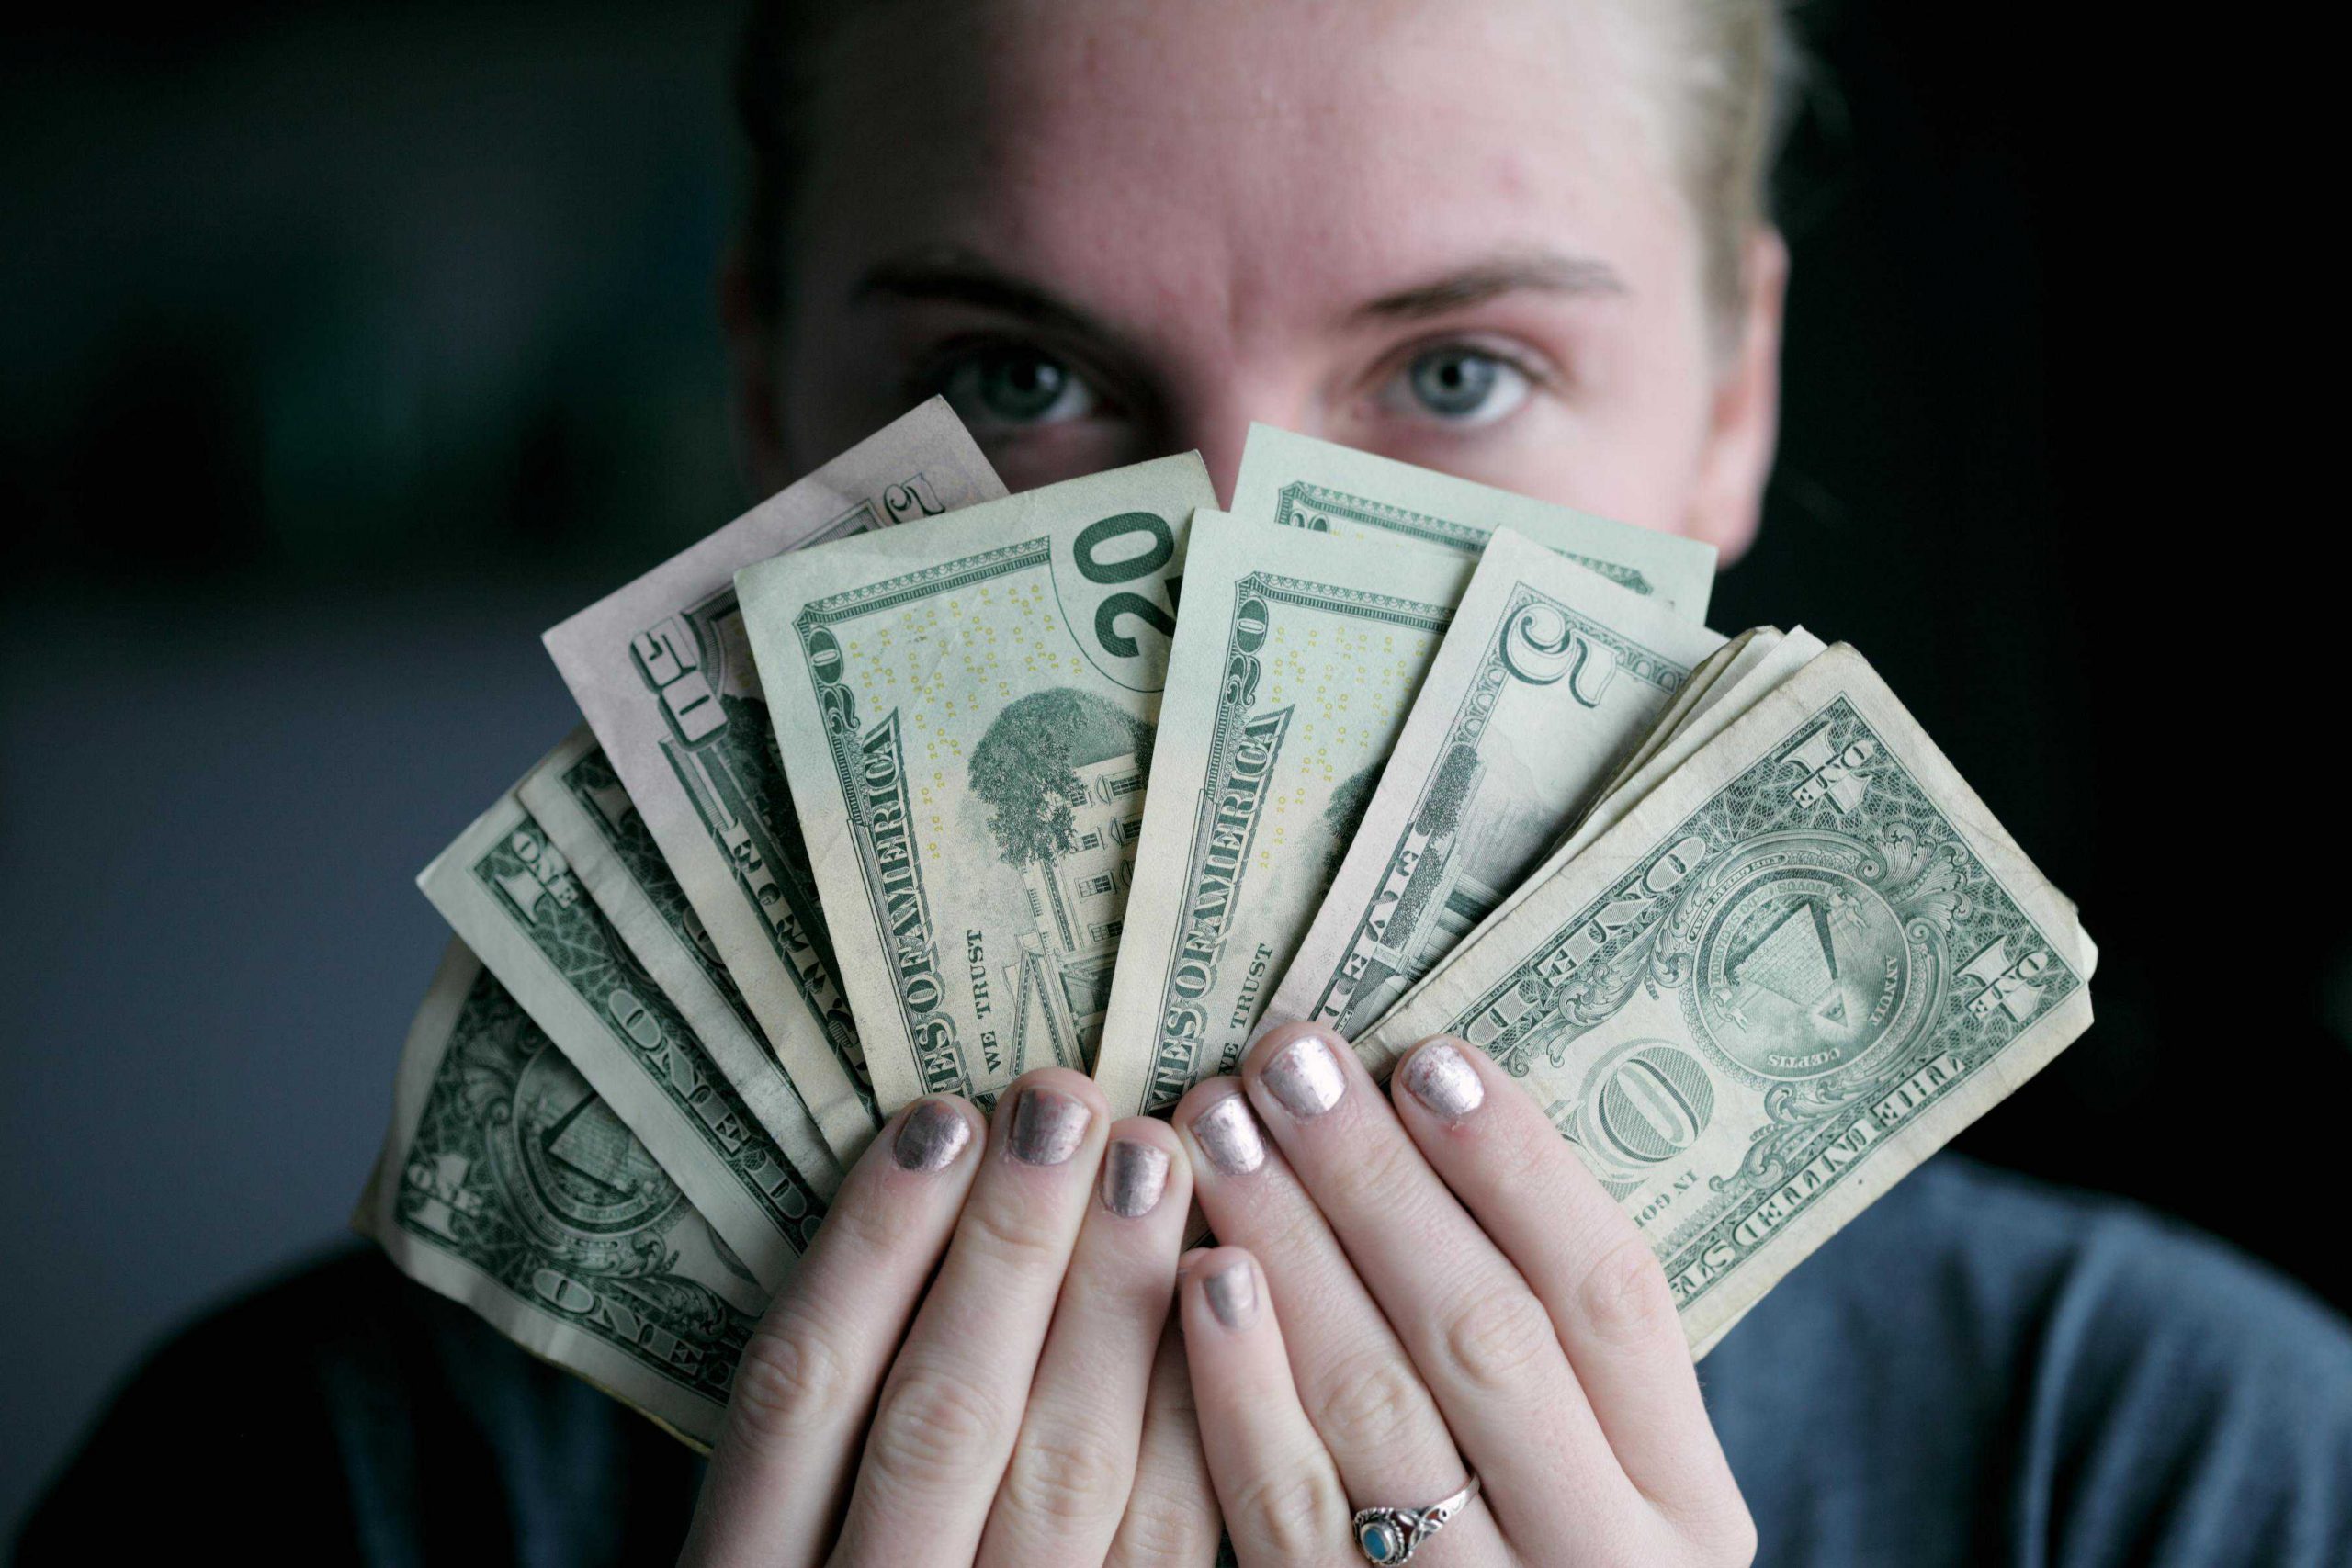 how women can reduce their anxiety over money by making smarter moves.